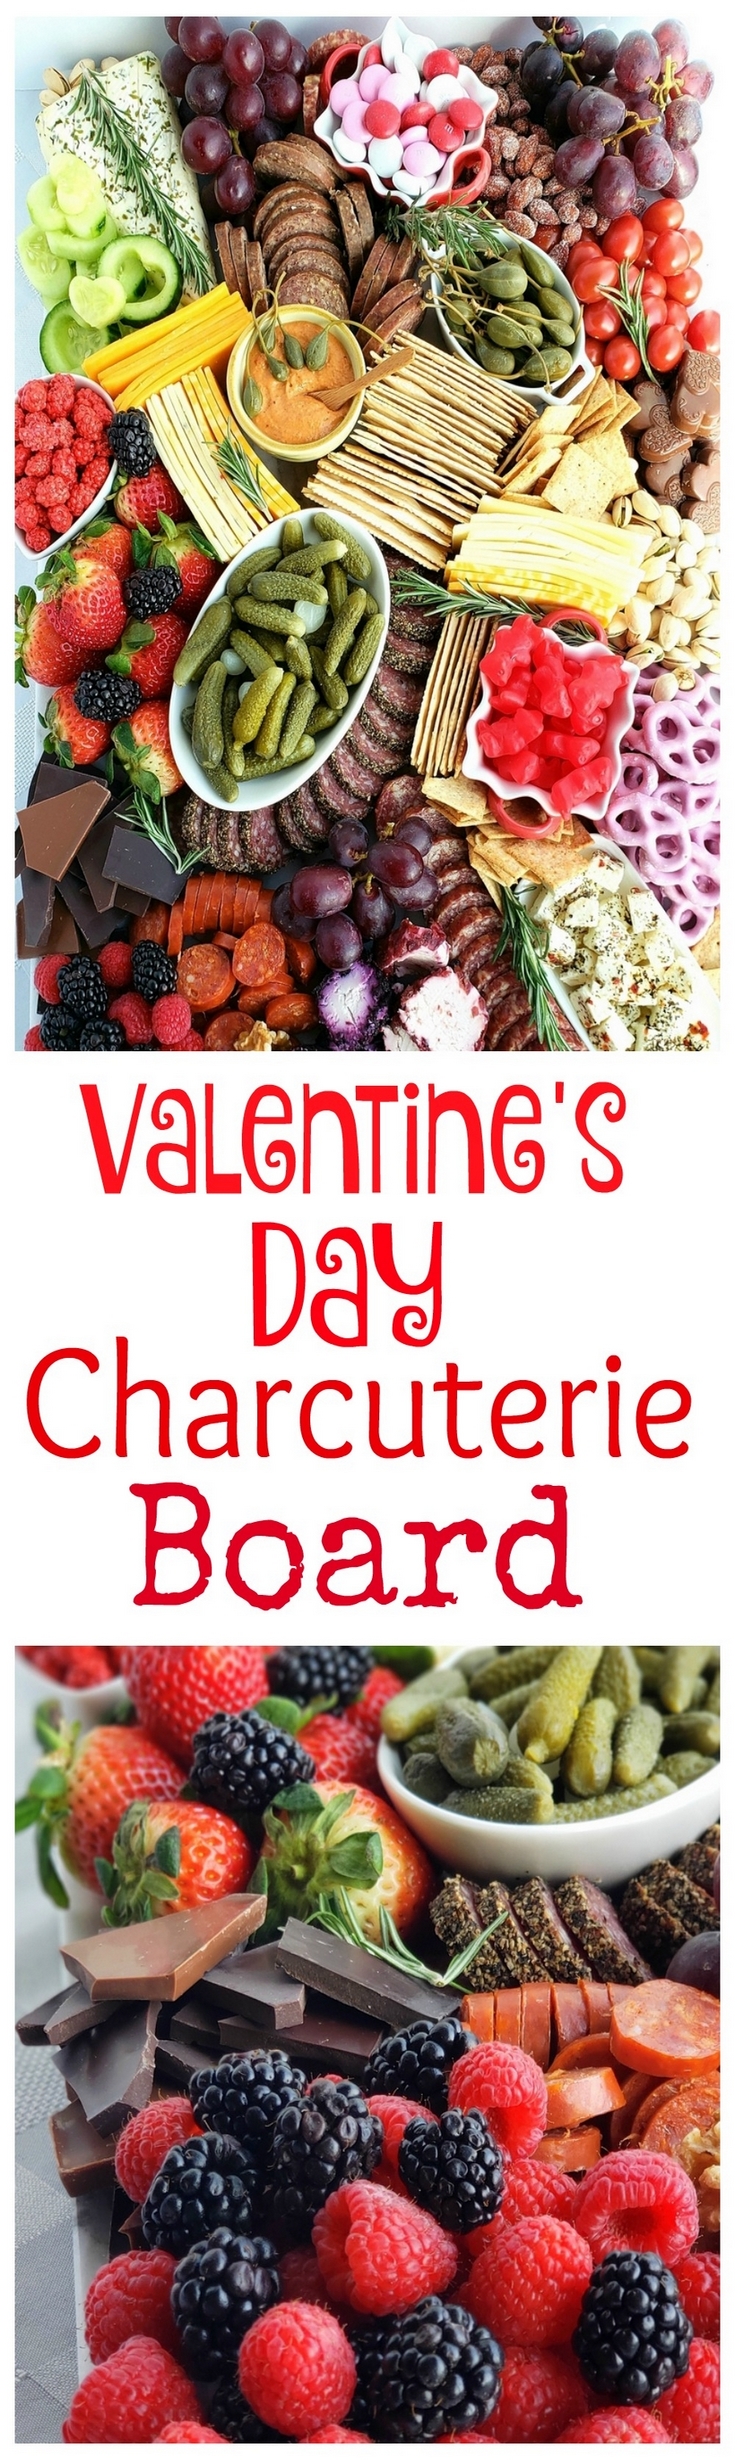 Celebrate a decadent Valentine's Day at home with a bottle of wine and a "love themed", easy to make Valentine's Day Charcuterie Board. #valentinesday #charcuterie #datenight via @cmpollak1